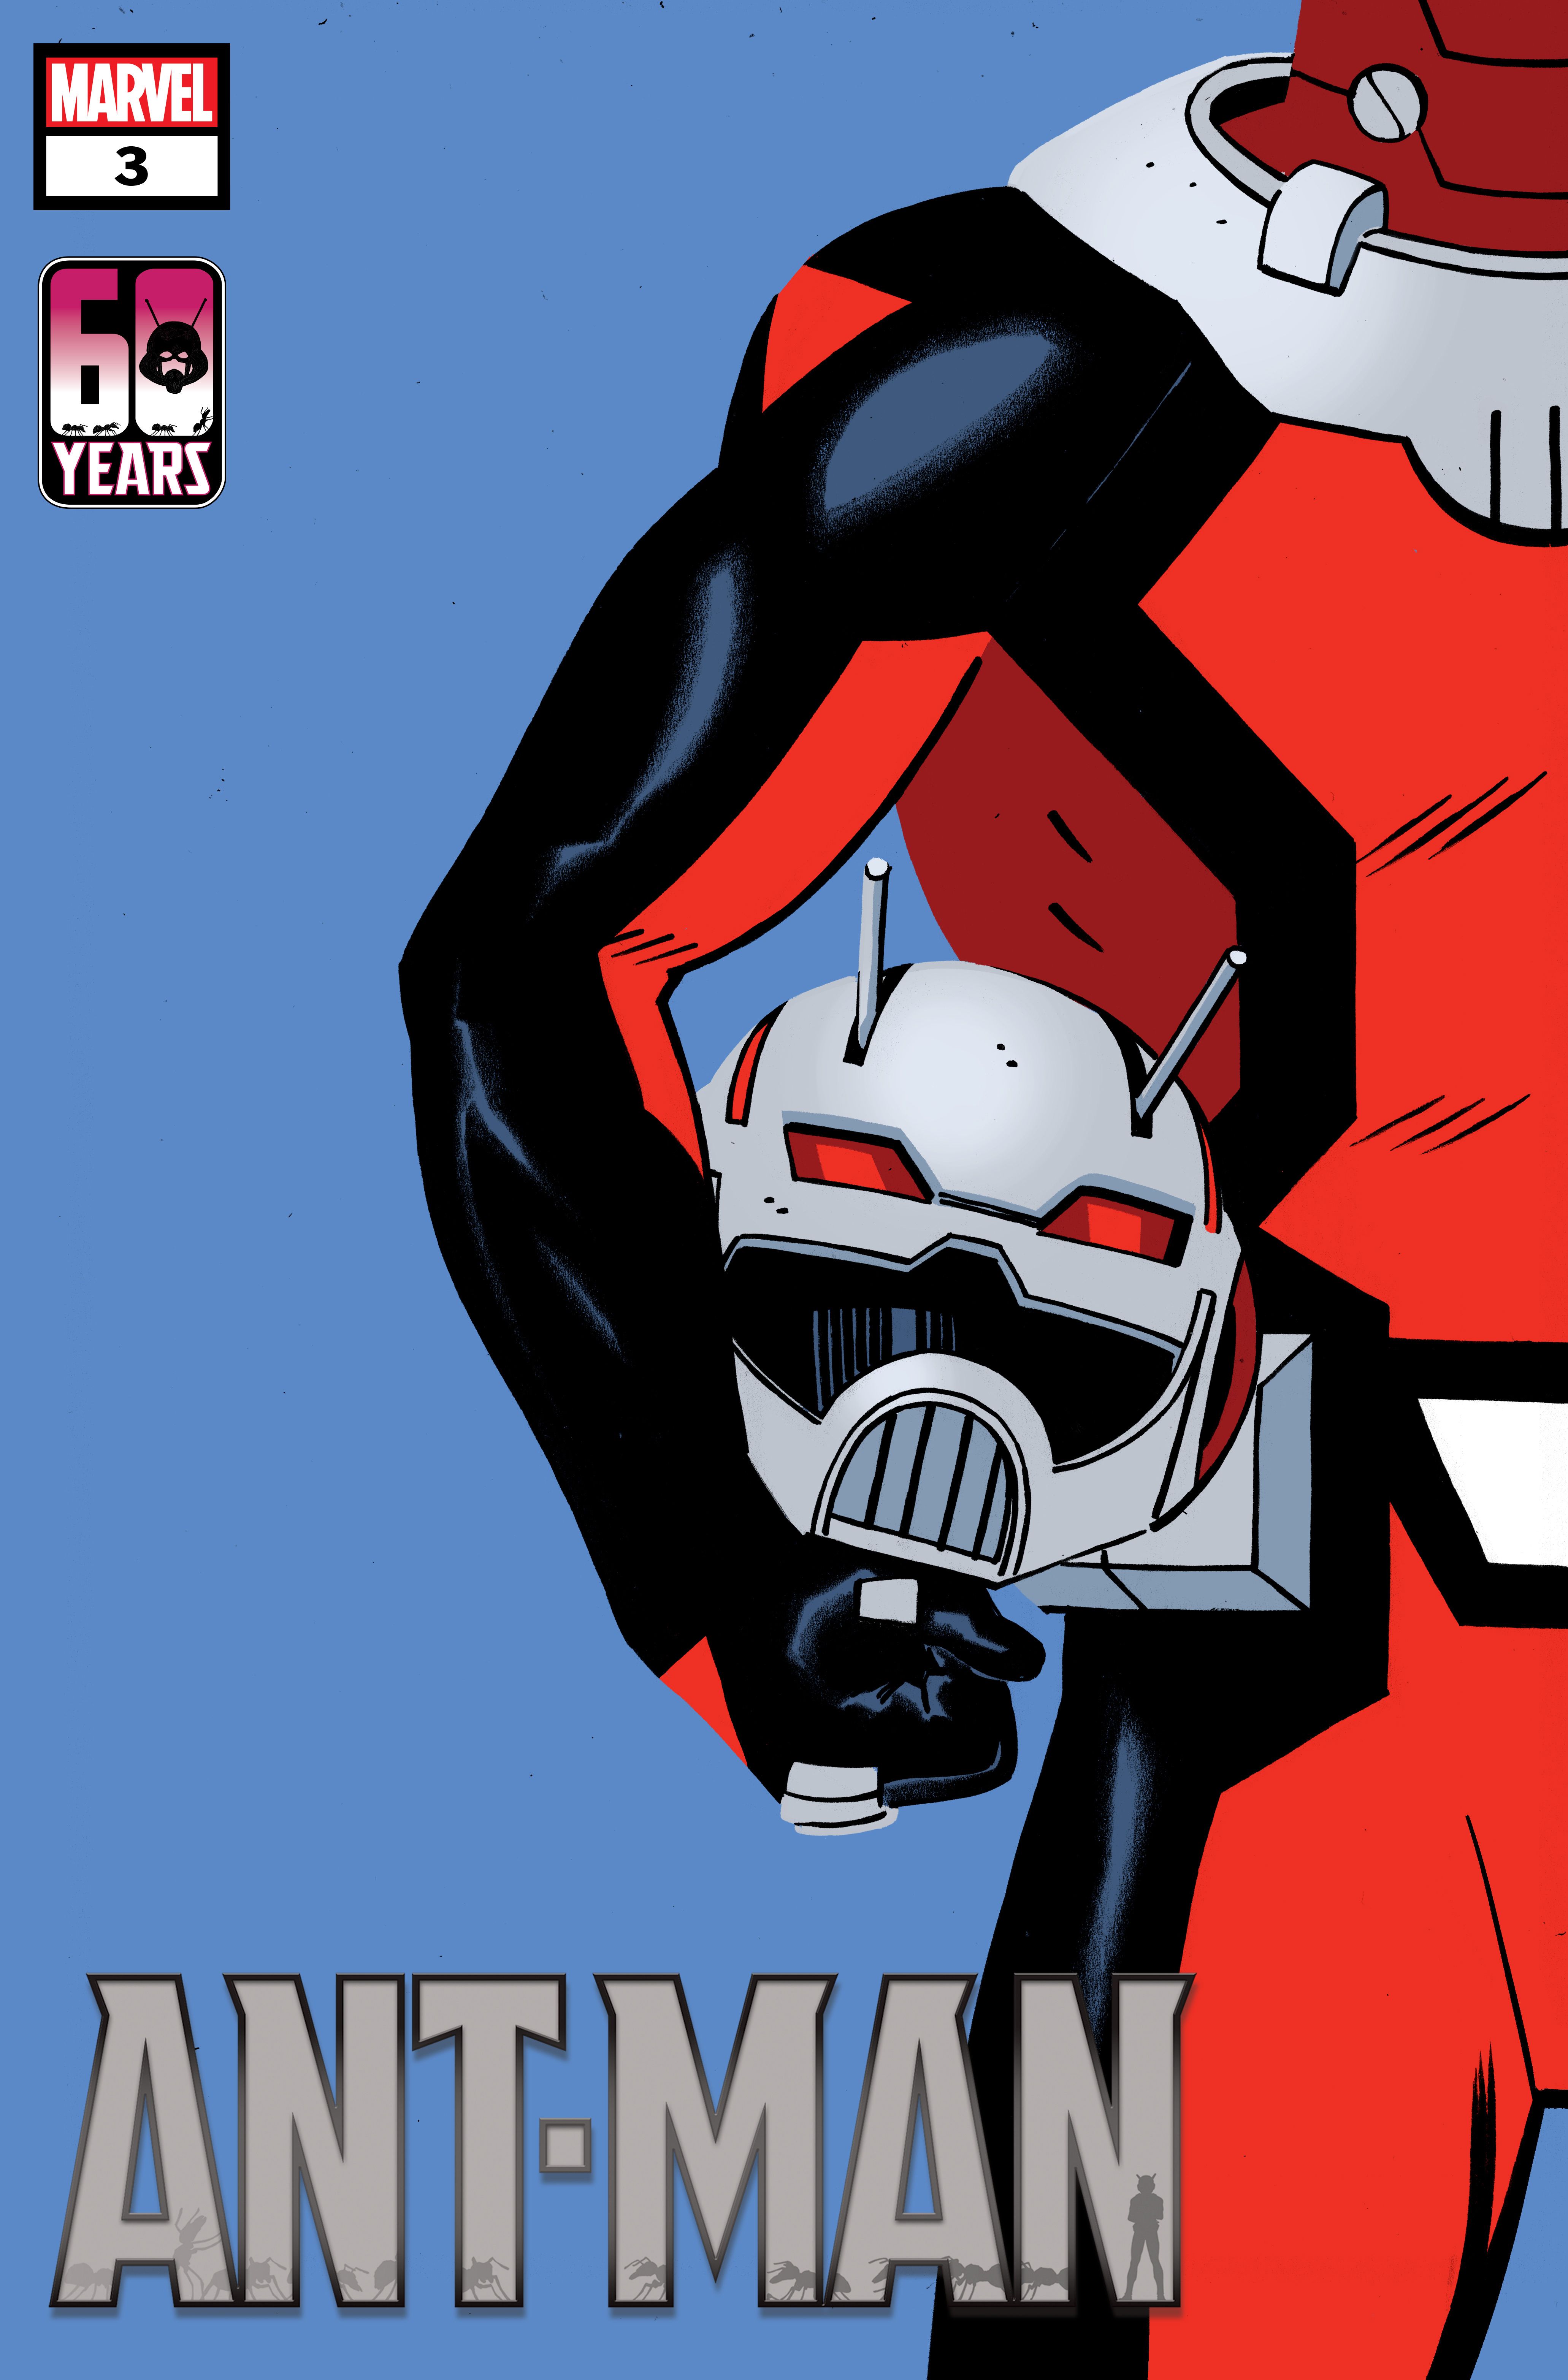 Ant-Man limited series issue 3 cover